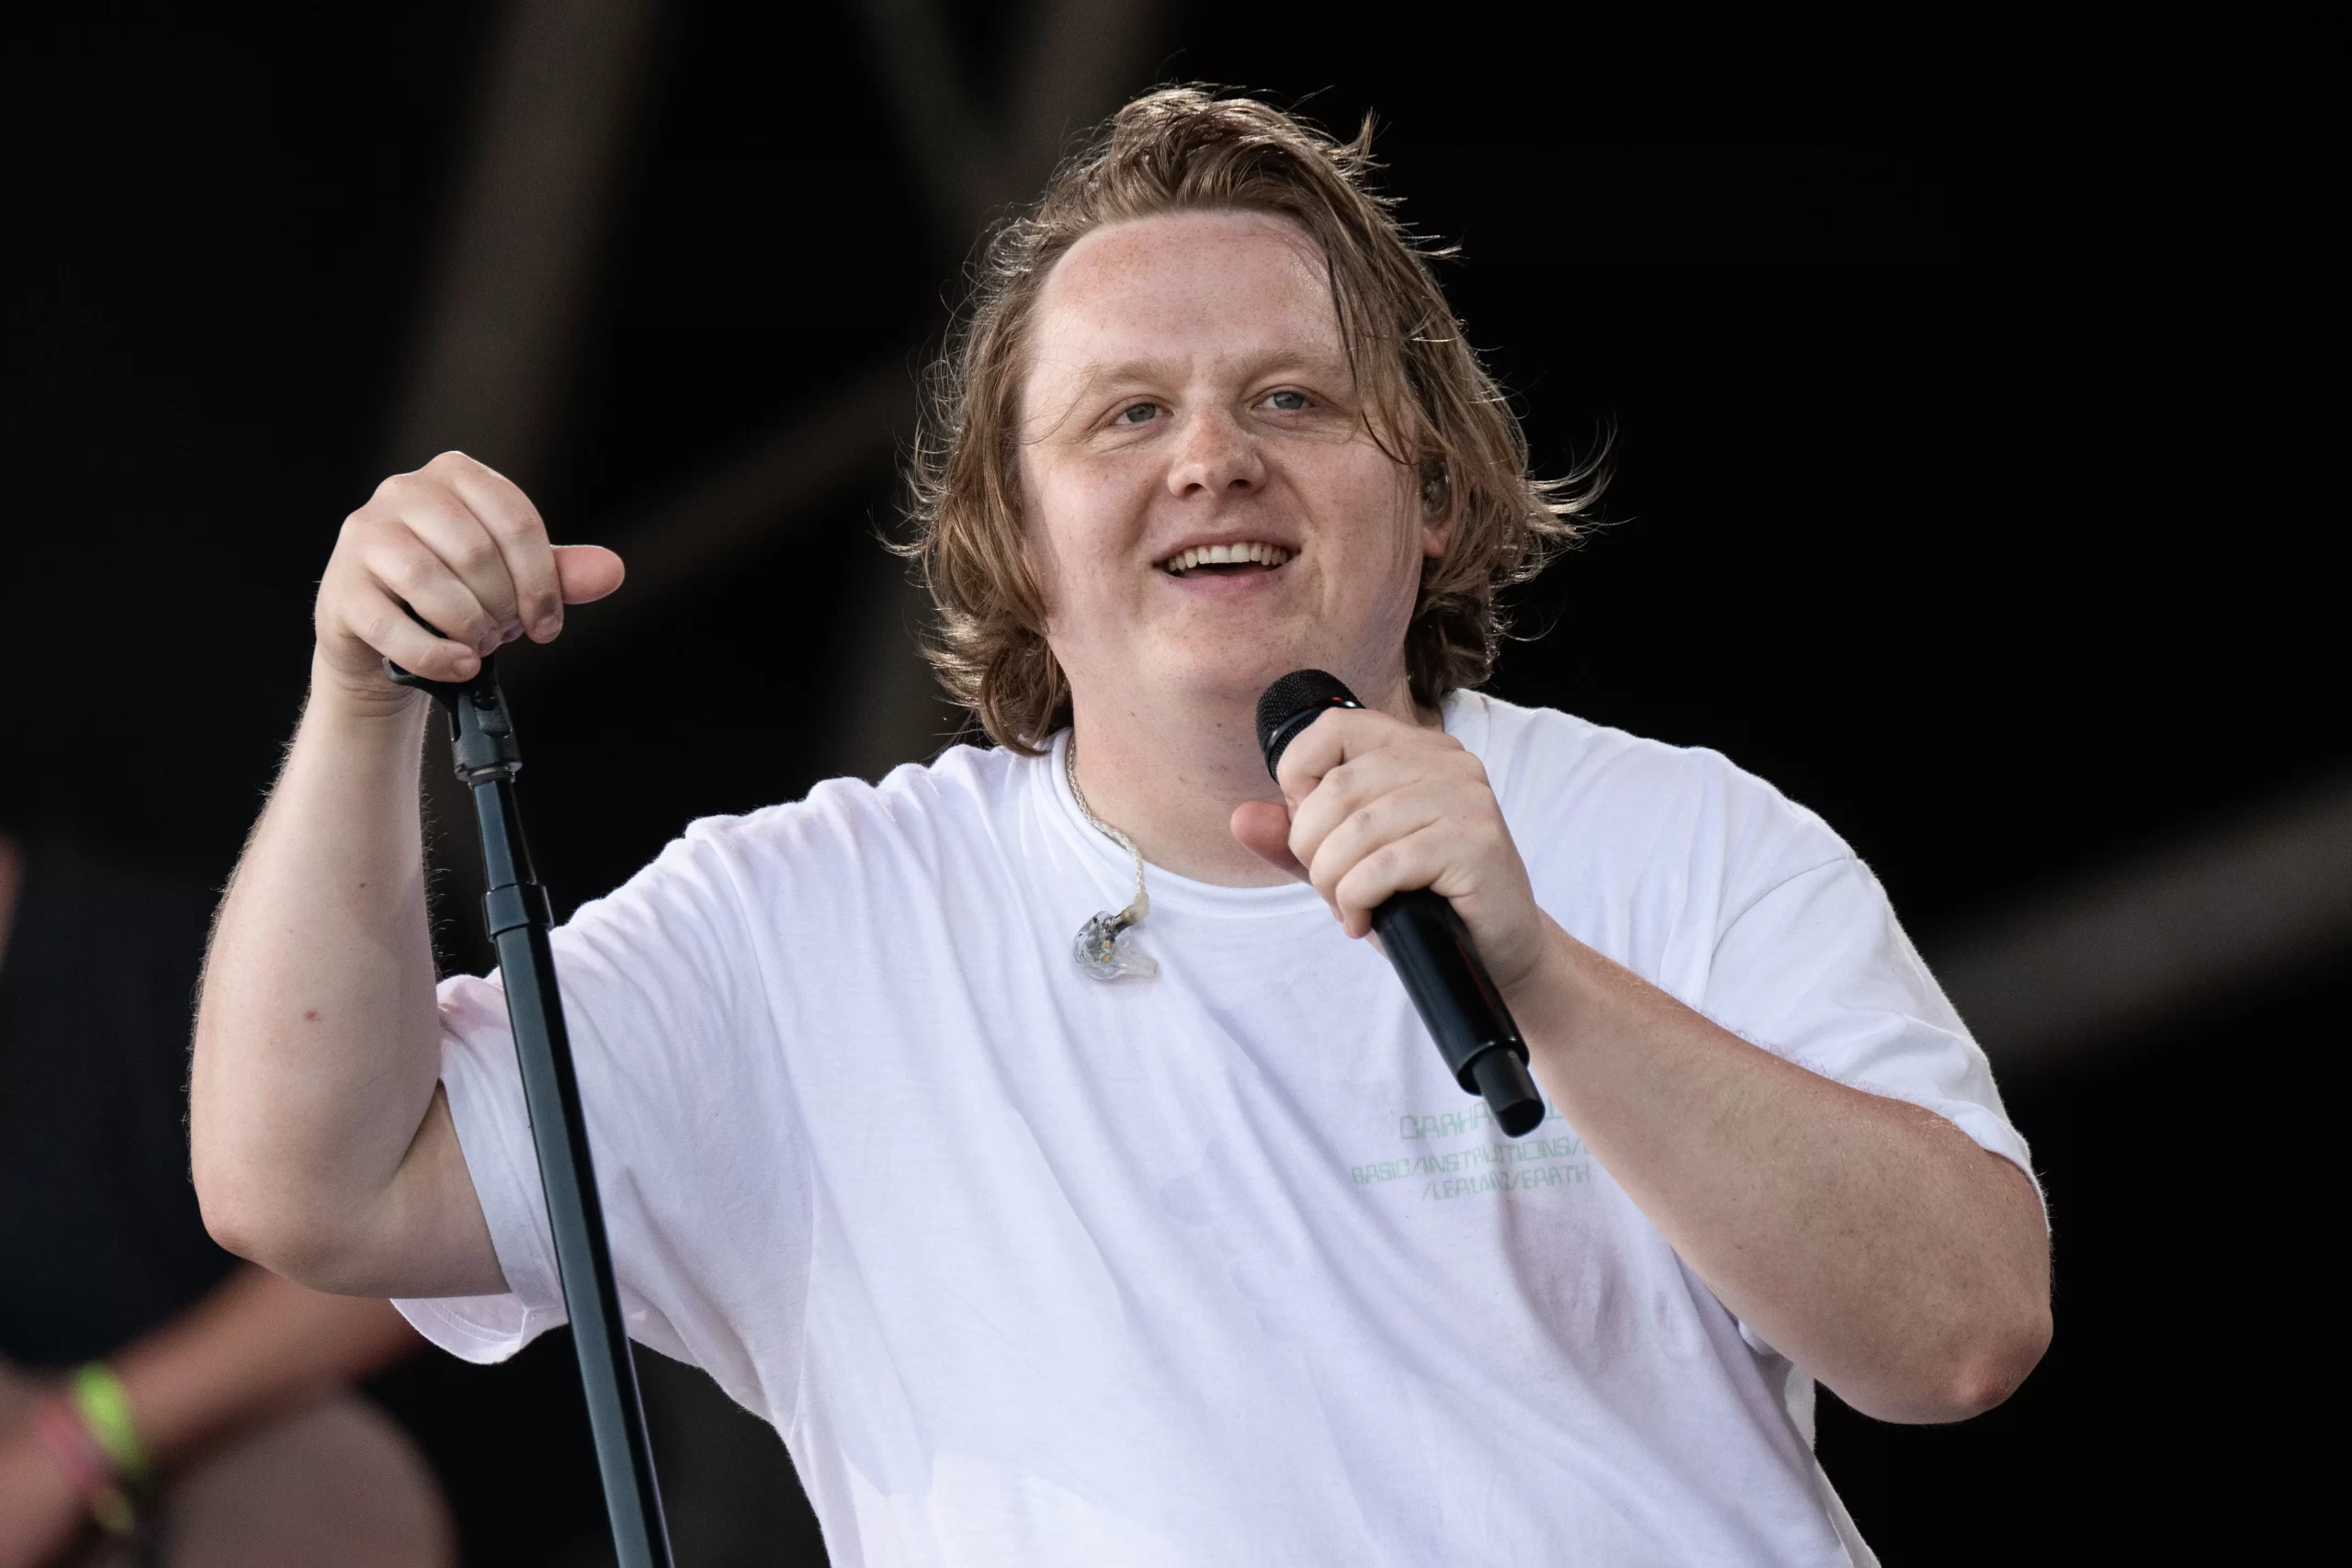 Lewis Capaldi shares health update, will continue touring hiatus in 2024